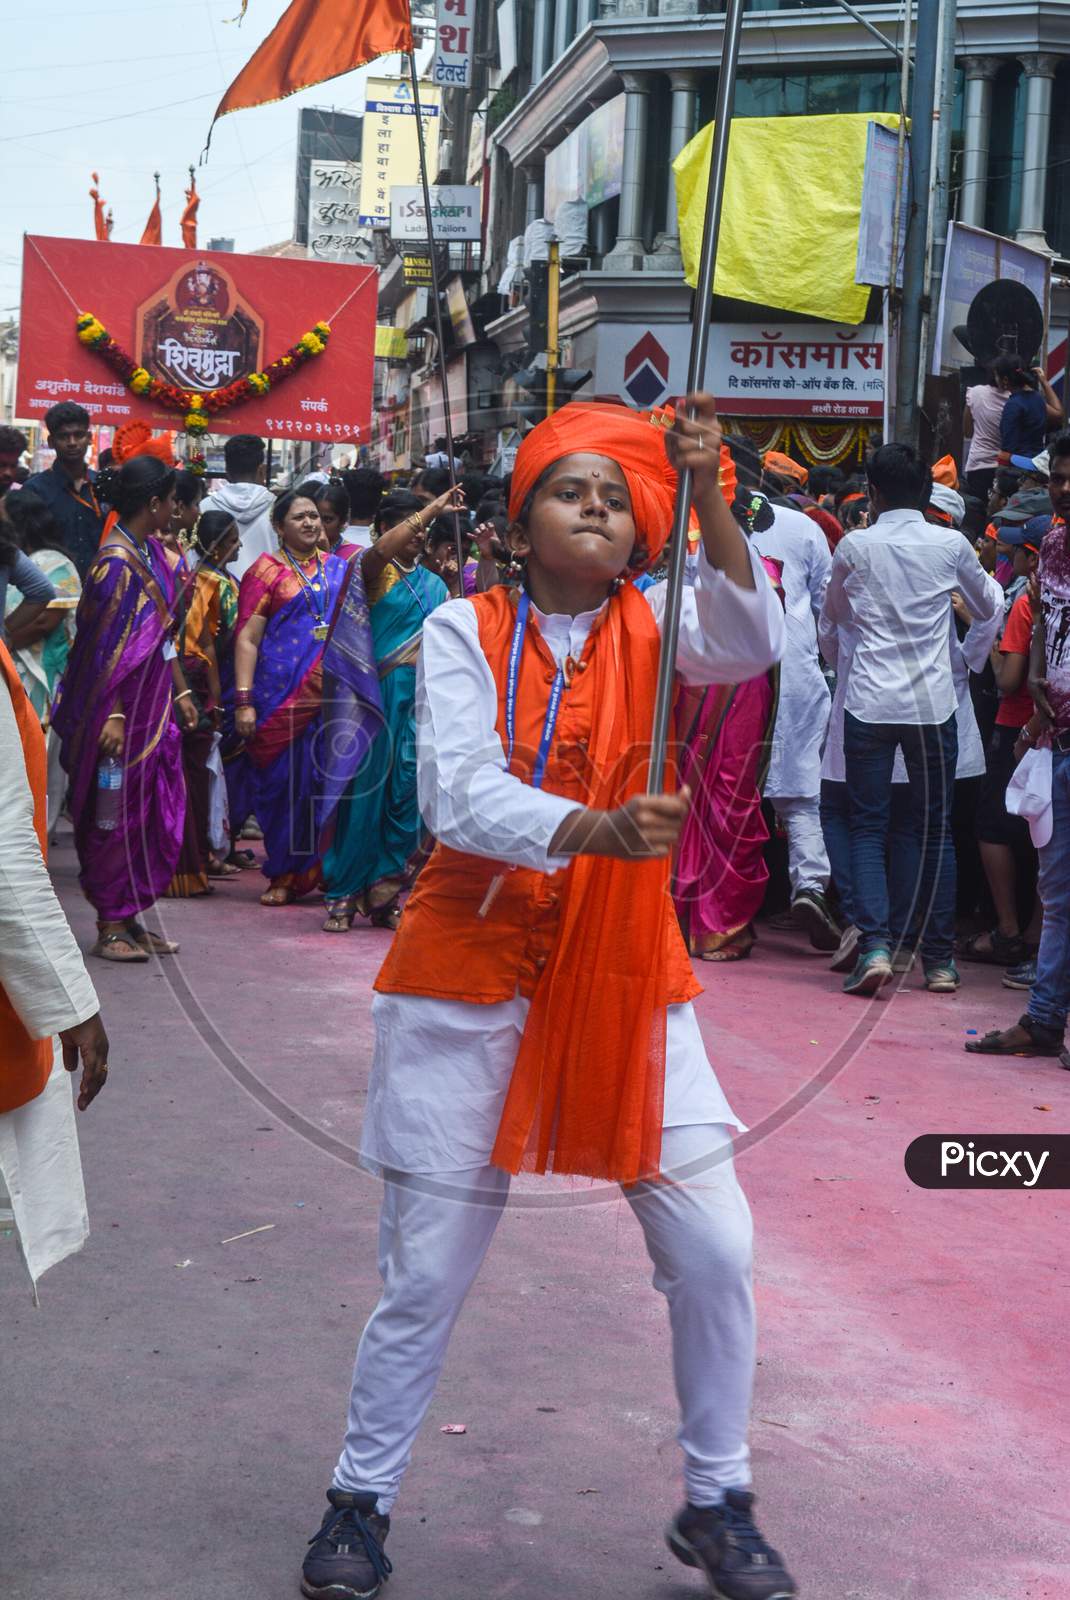 Pune, India - September 4, 2017: A Small Girl Looking Aggressive And Is Passionately Dancing With A Flag On The Occasion Of Ganpati Visarjan Festival / Anant Chaturdashi Festival Celebration In Pune.